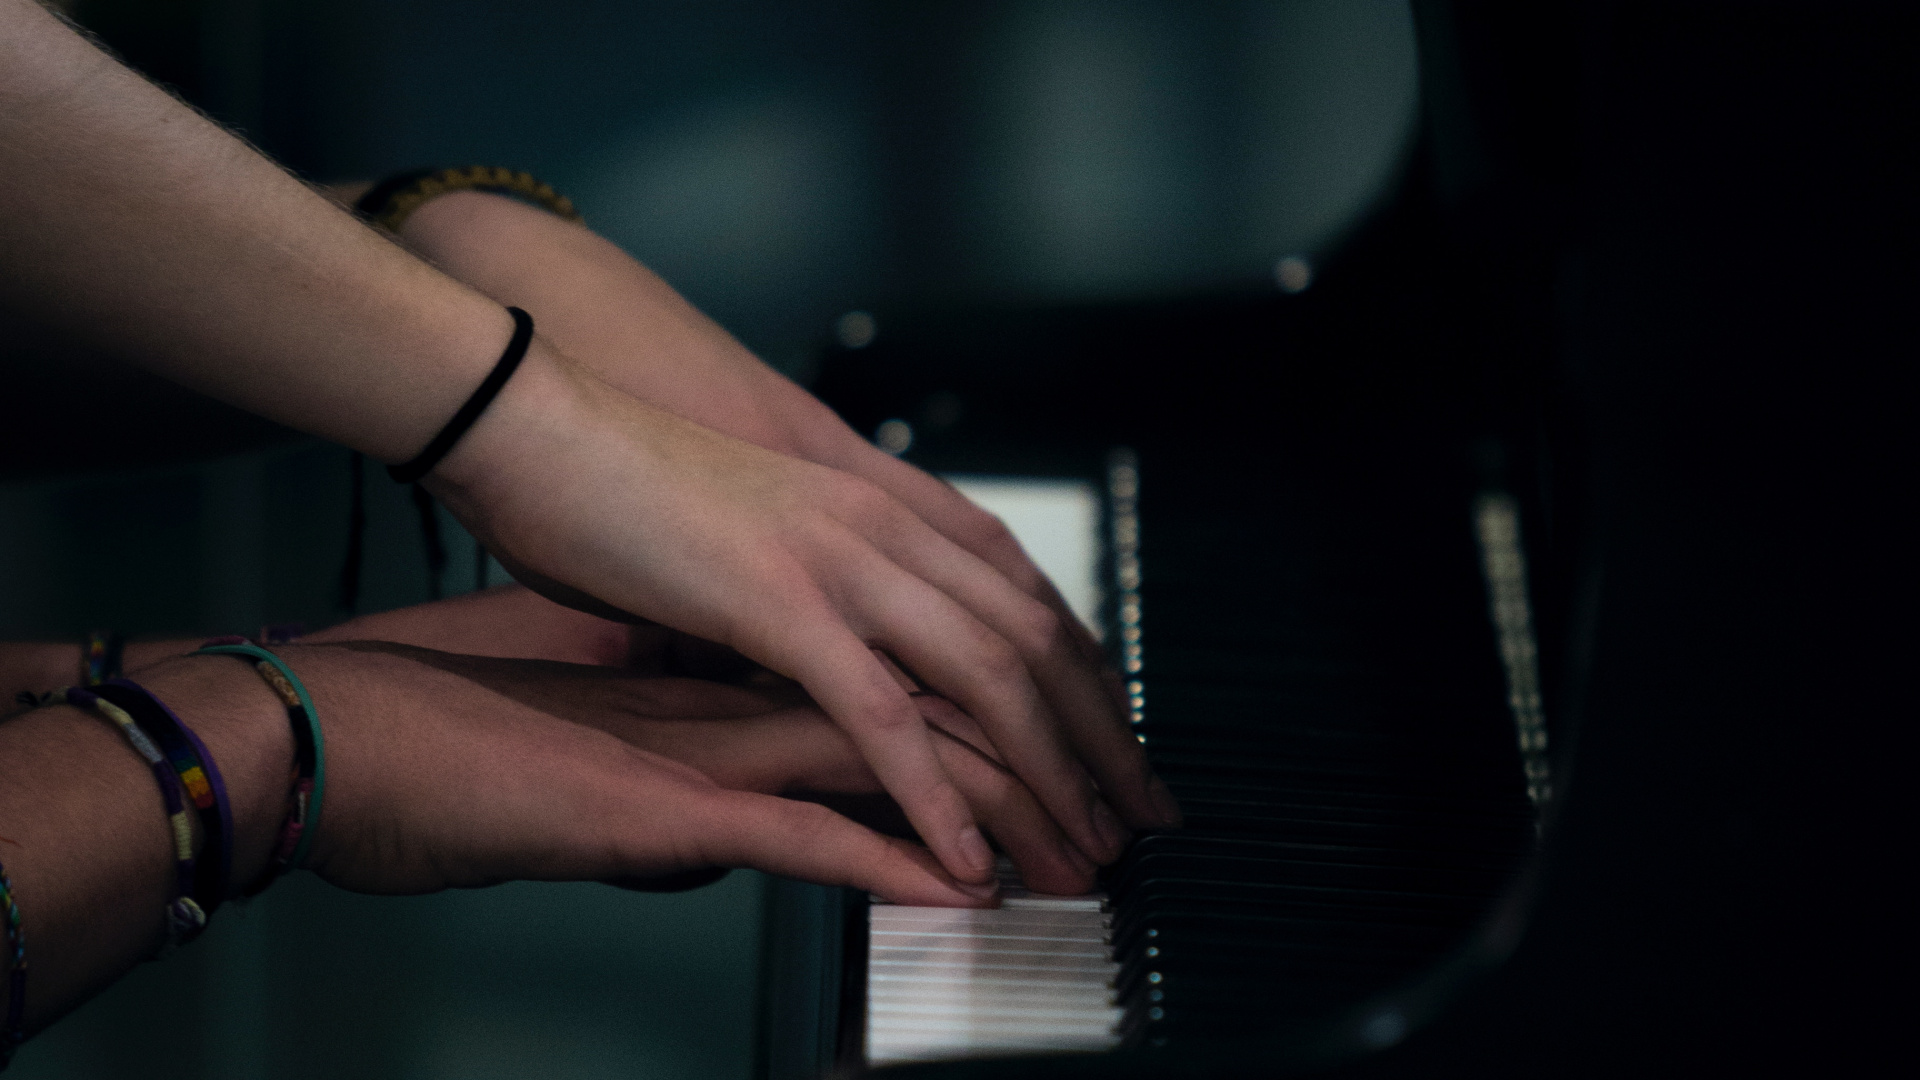 Piano, Pianist, Hand, Musician, Arm. Wallpaper in 1920x1080 Resolution